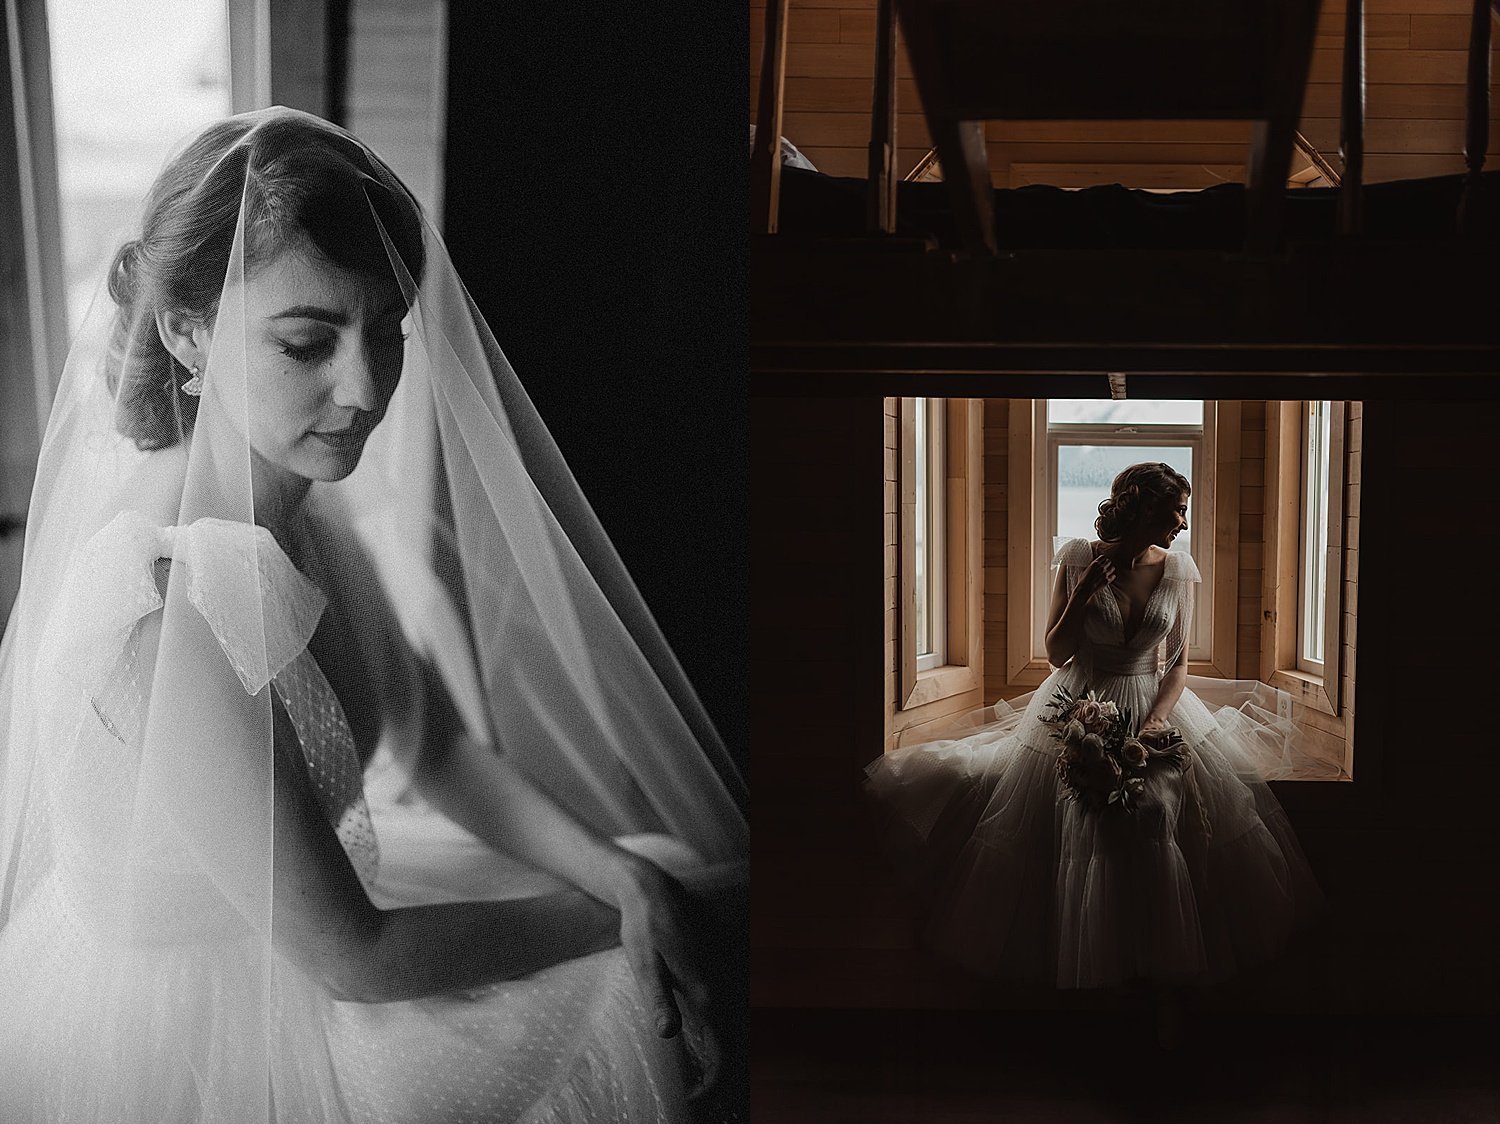  Bride wearing veil in close up portraits for vintage inspired shoot by alaska wedding photographer theresa mcdonald 